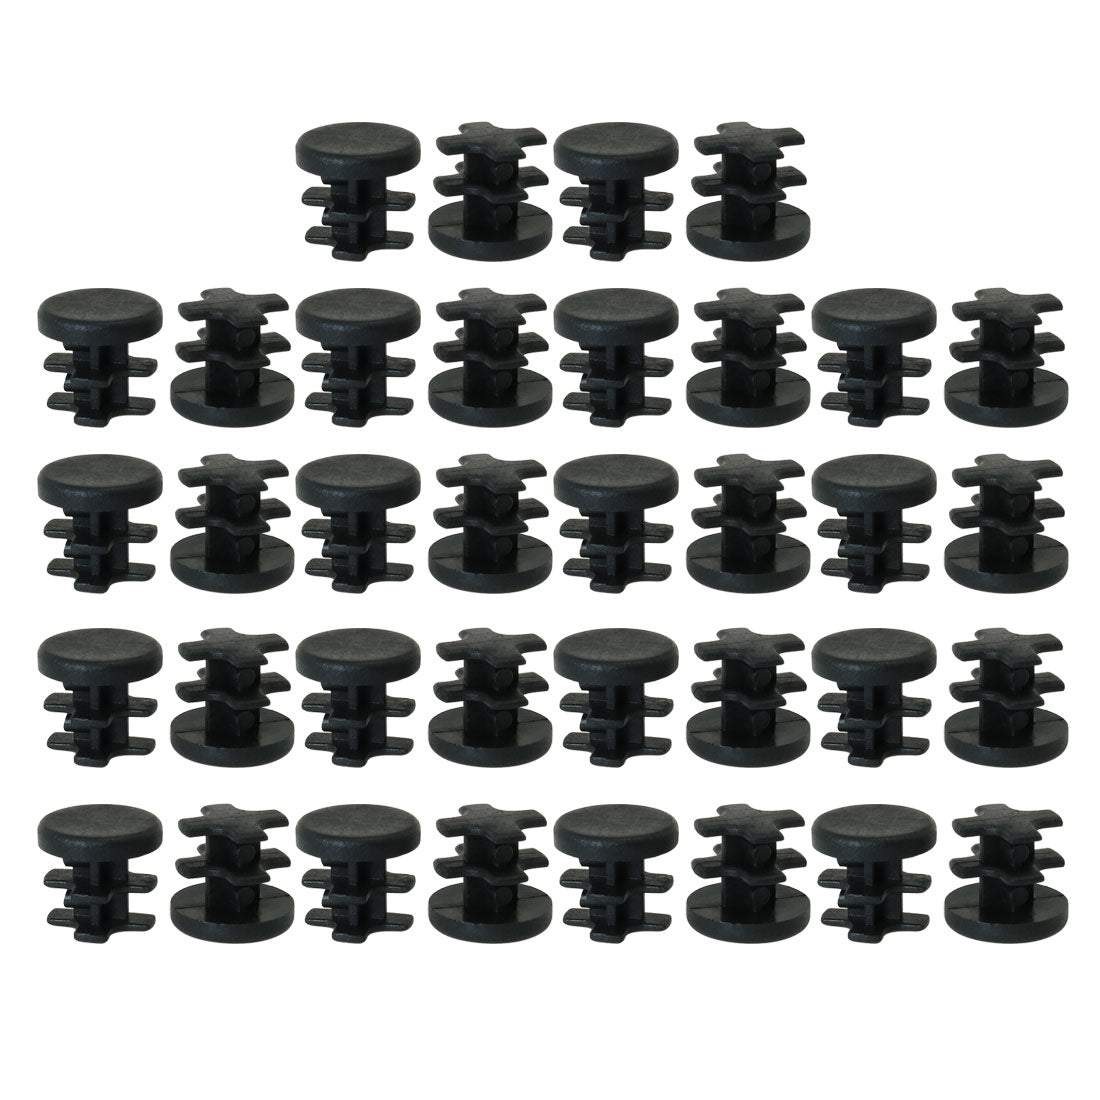 Uxcell Uxcell 3/4" 0.75" OD Plastic Round Tube Insert Glide End Cap Pad 36pcs 0.63"-0.71" Inner Dia for Furniture Table Feet Protector Easy Move